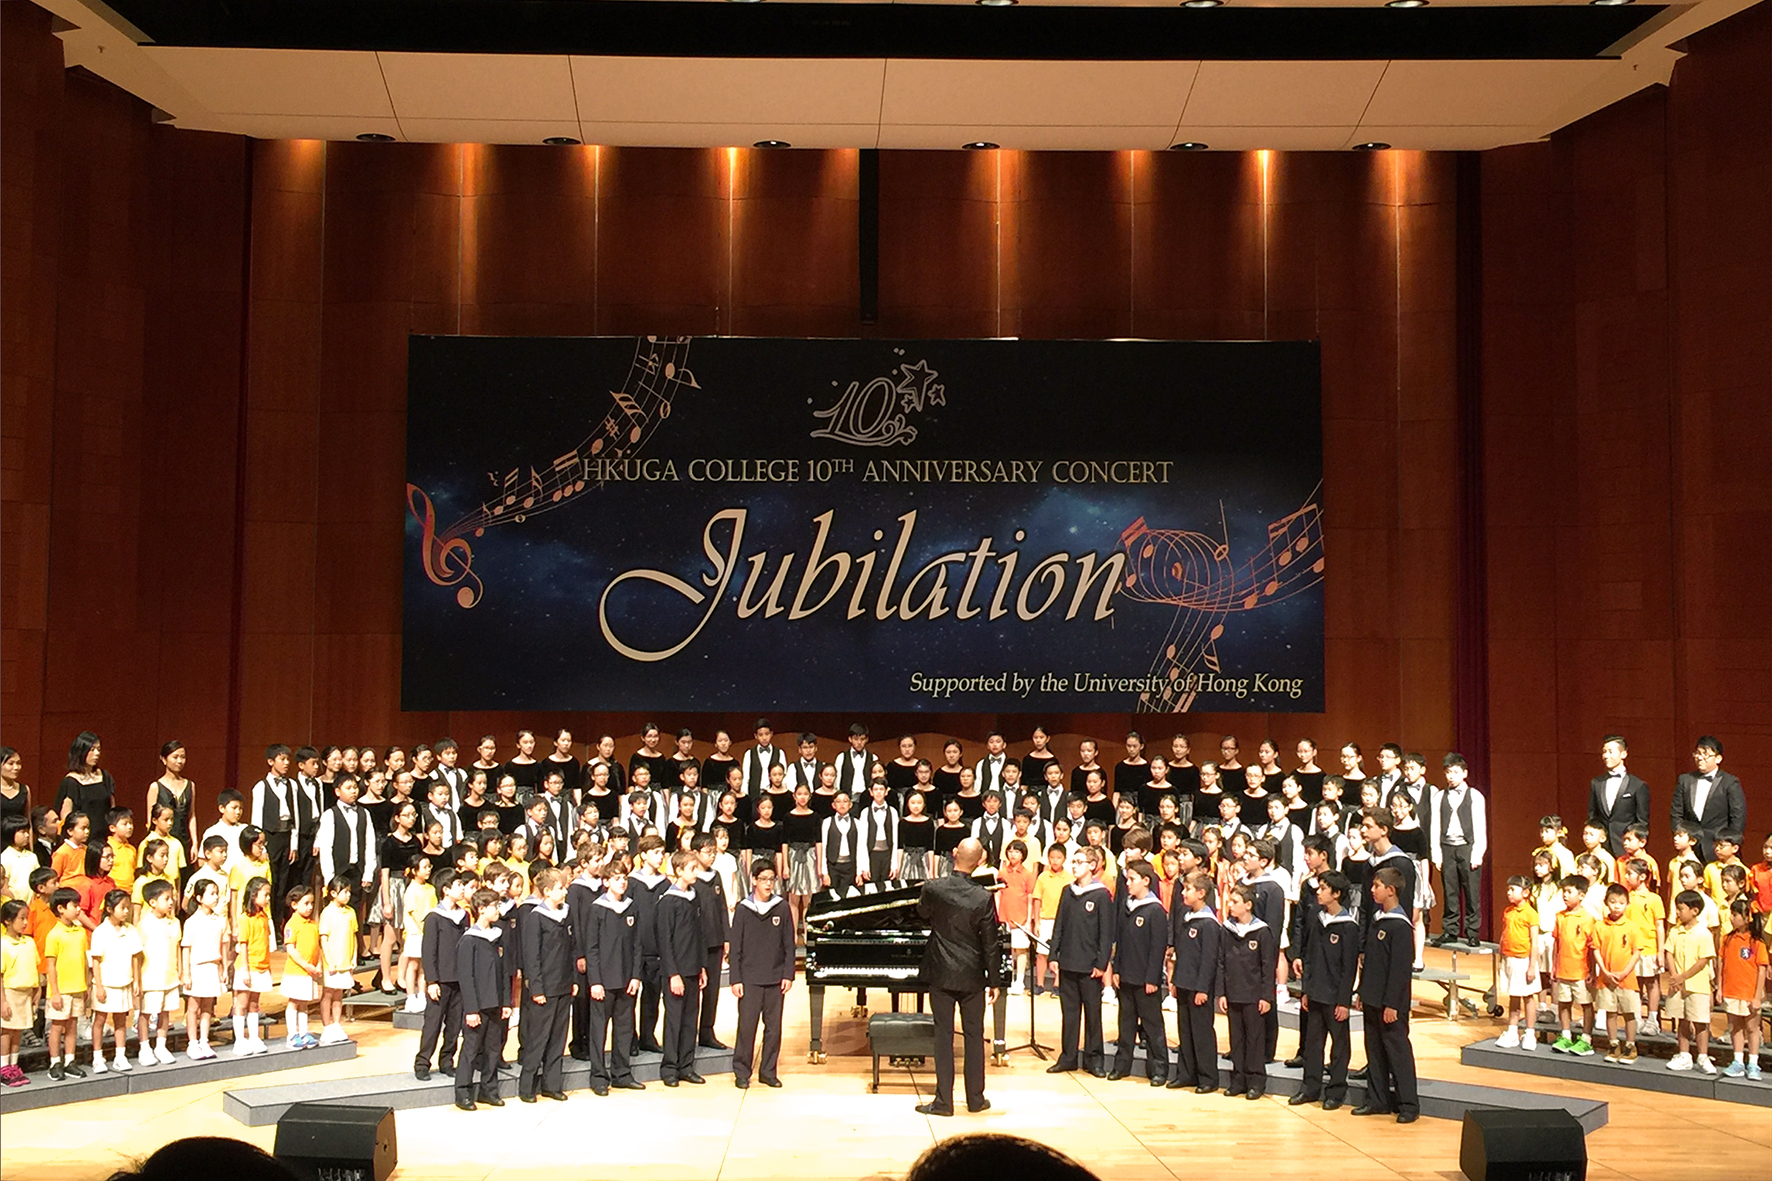 The concert took place in the Grand Hall of HKU.